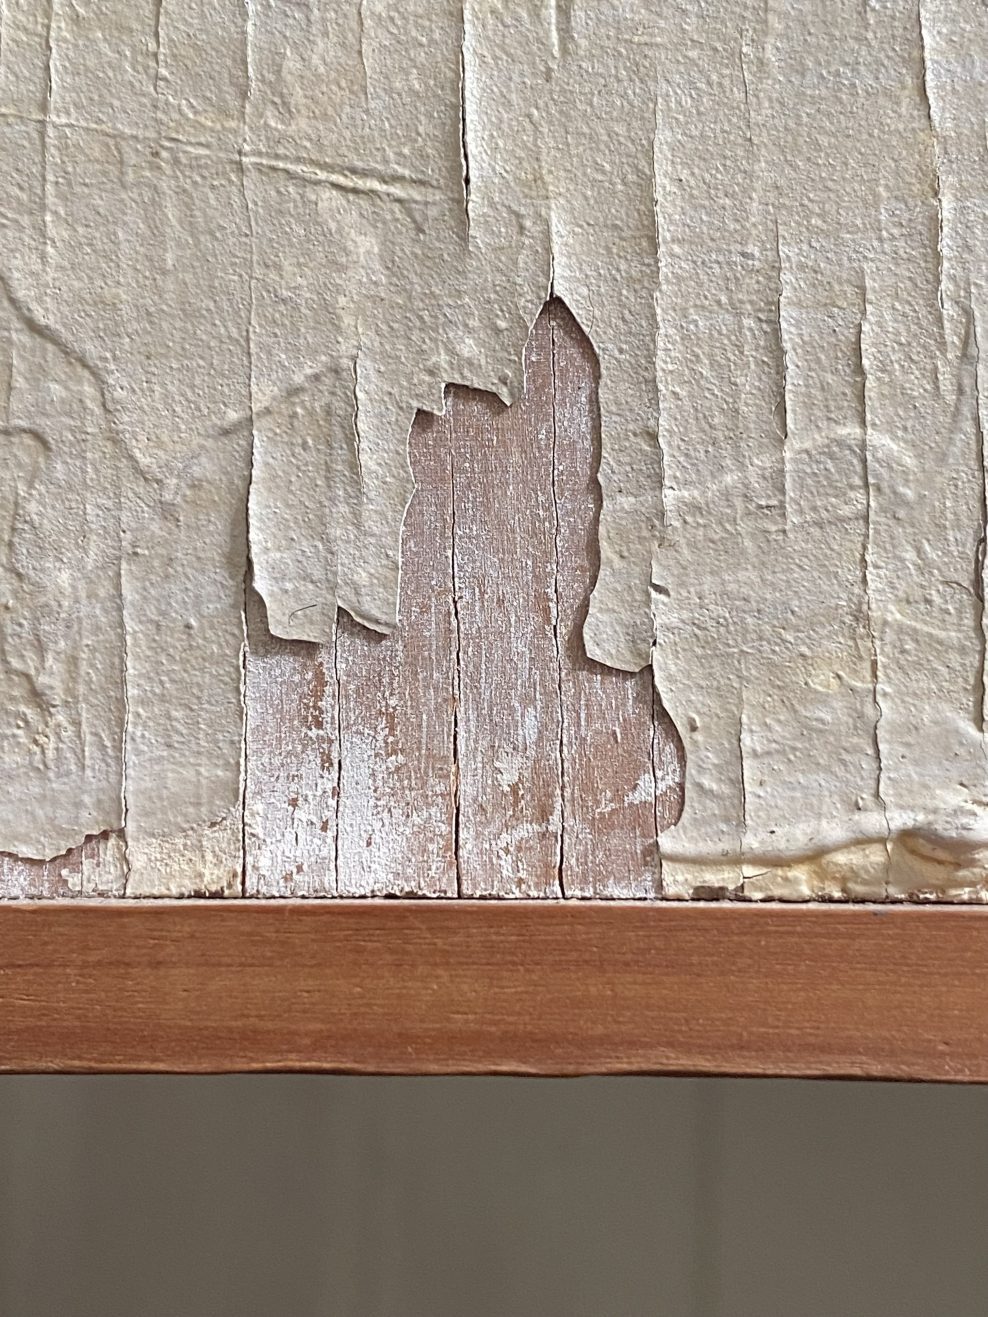 Paint loss before treatment.